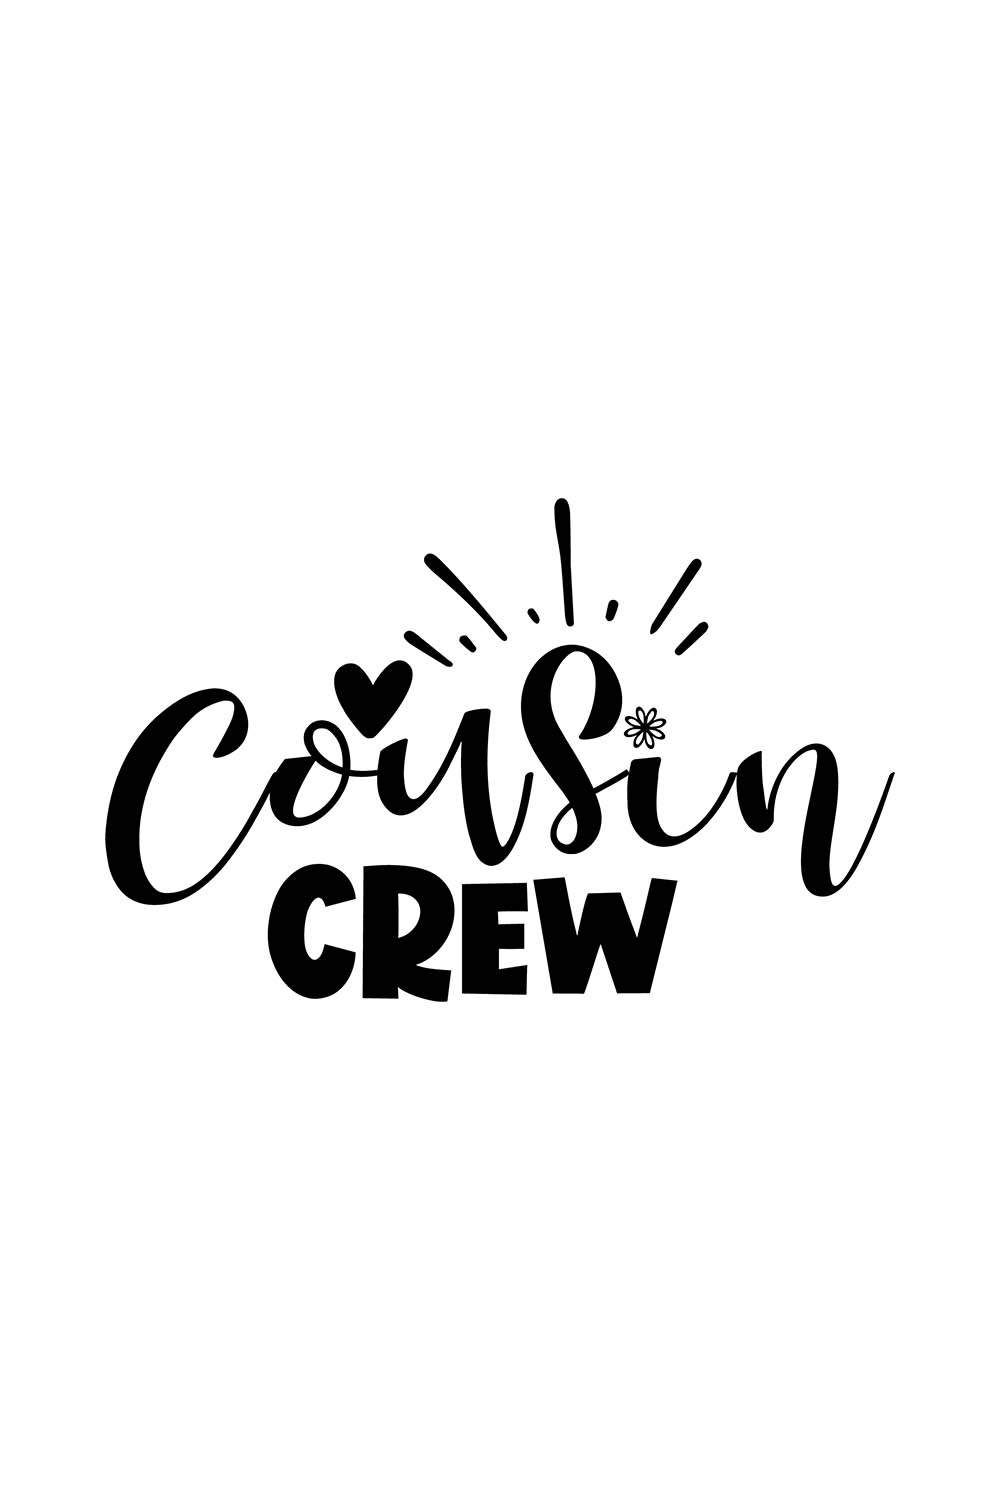 Image with irresistible black lettering for Cousin Crew prints.